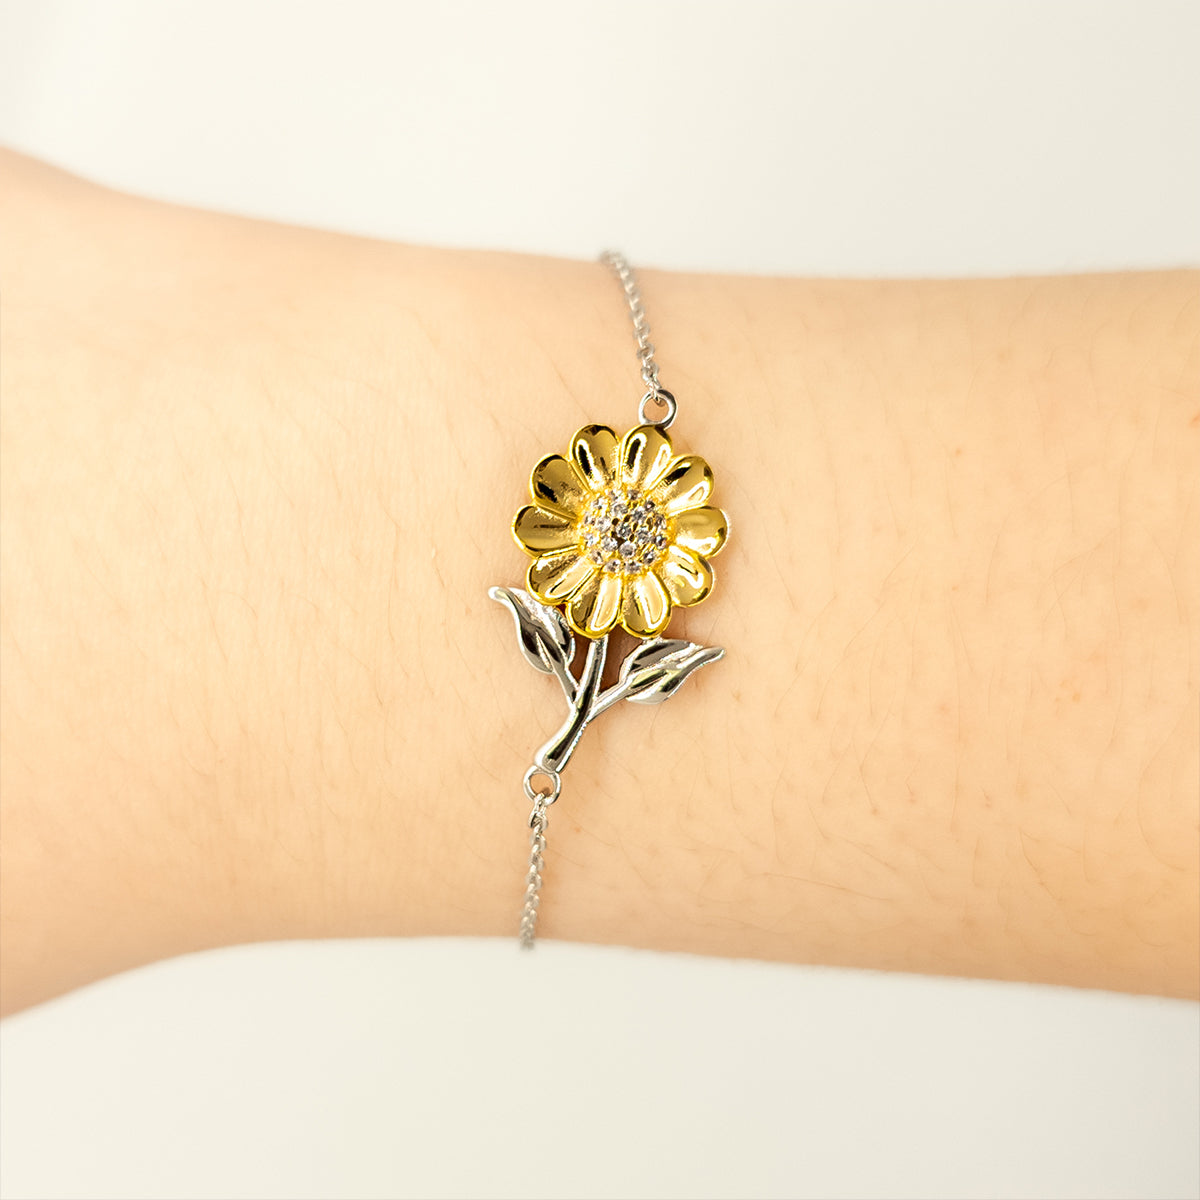 Stepbrother Sunflower Bracelet - Youll Always Have a Special Place in My Heart - Engraved Gift for Birthday, Christmas, Graduation, and More